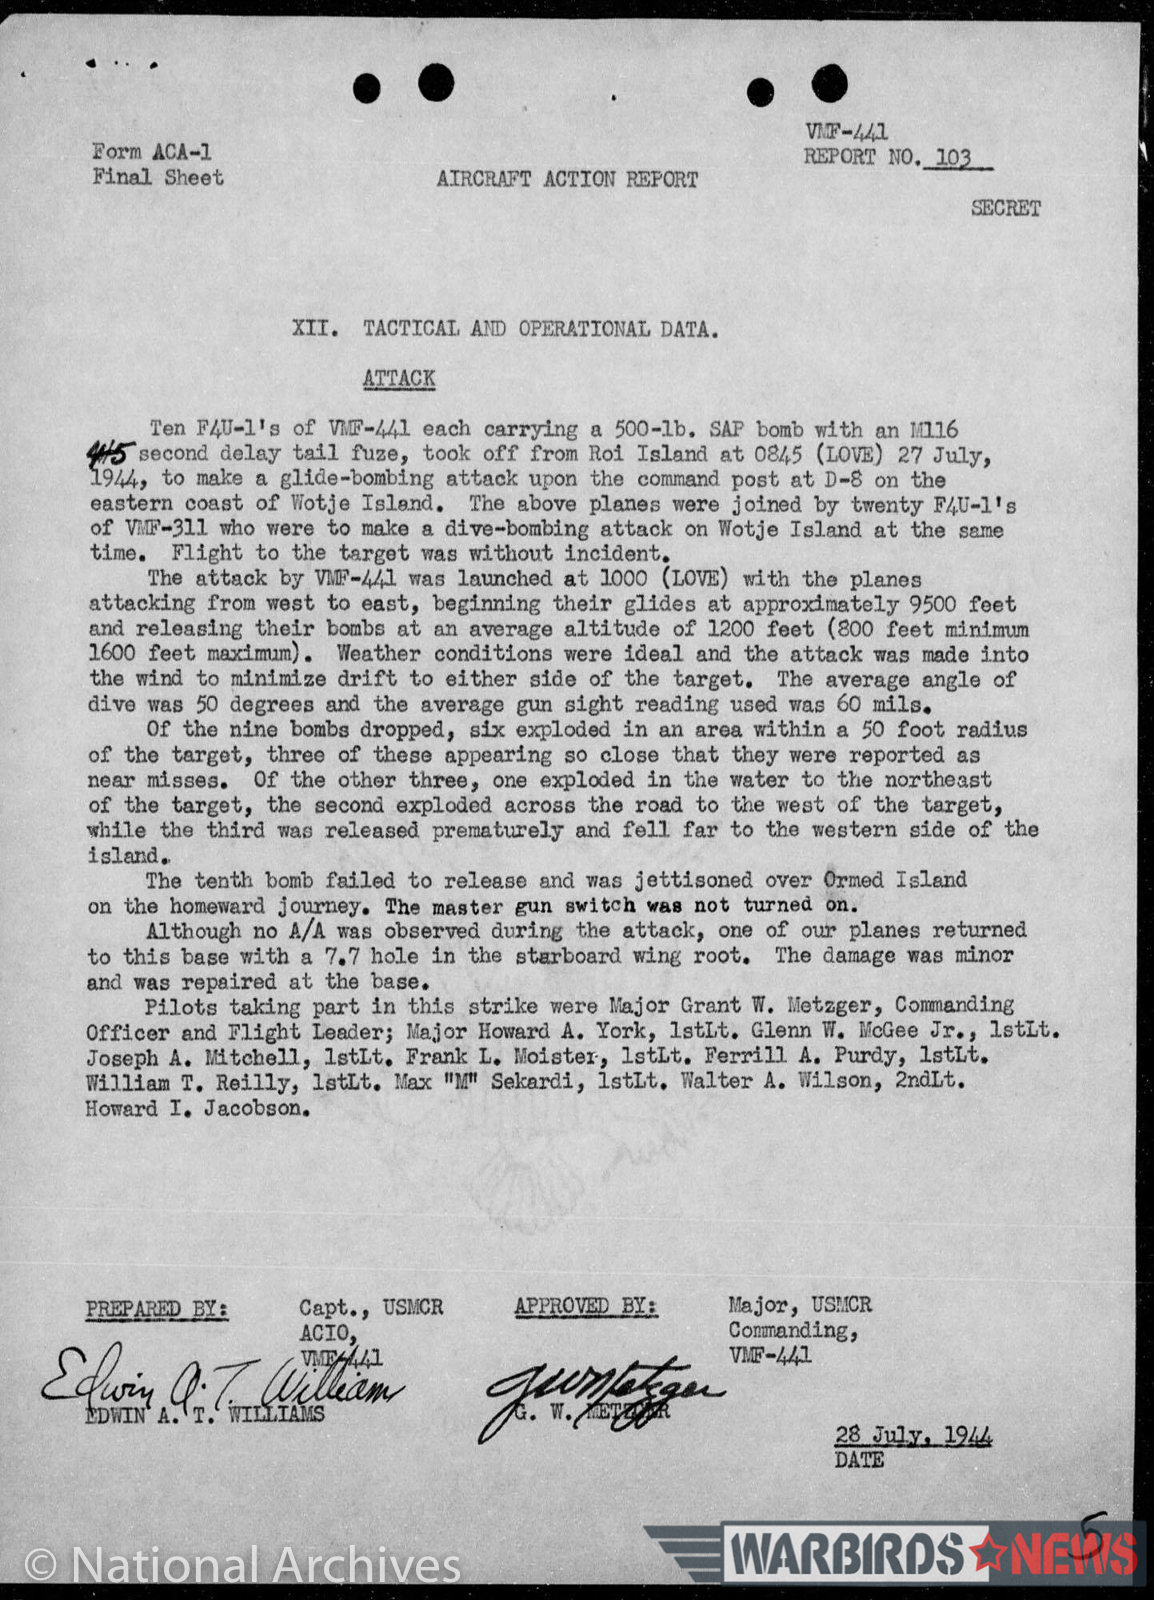 VMF-441 Operational Log for July 28th, 1944 detailing an attack by the squadron's Corsairs upon an enemy installation on Wotje Island. (image via Chris Fahey) 